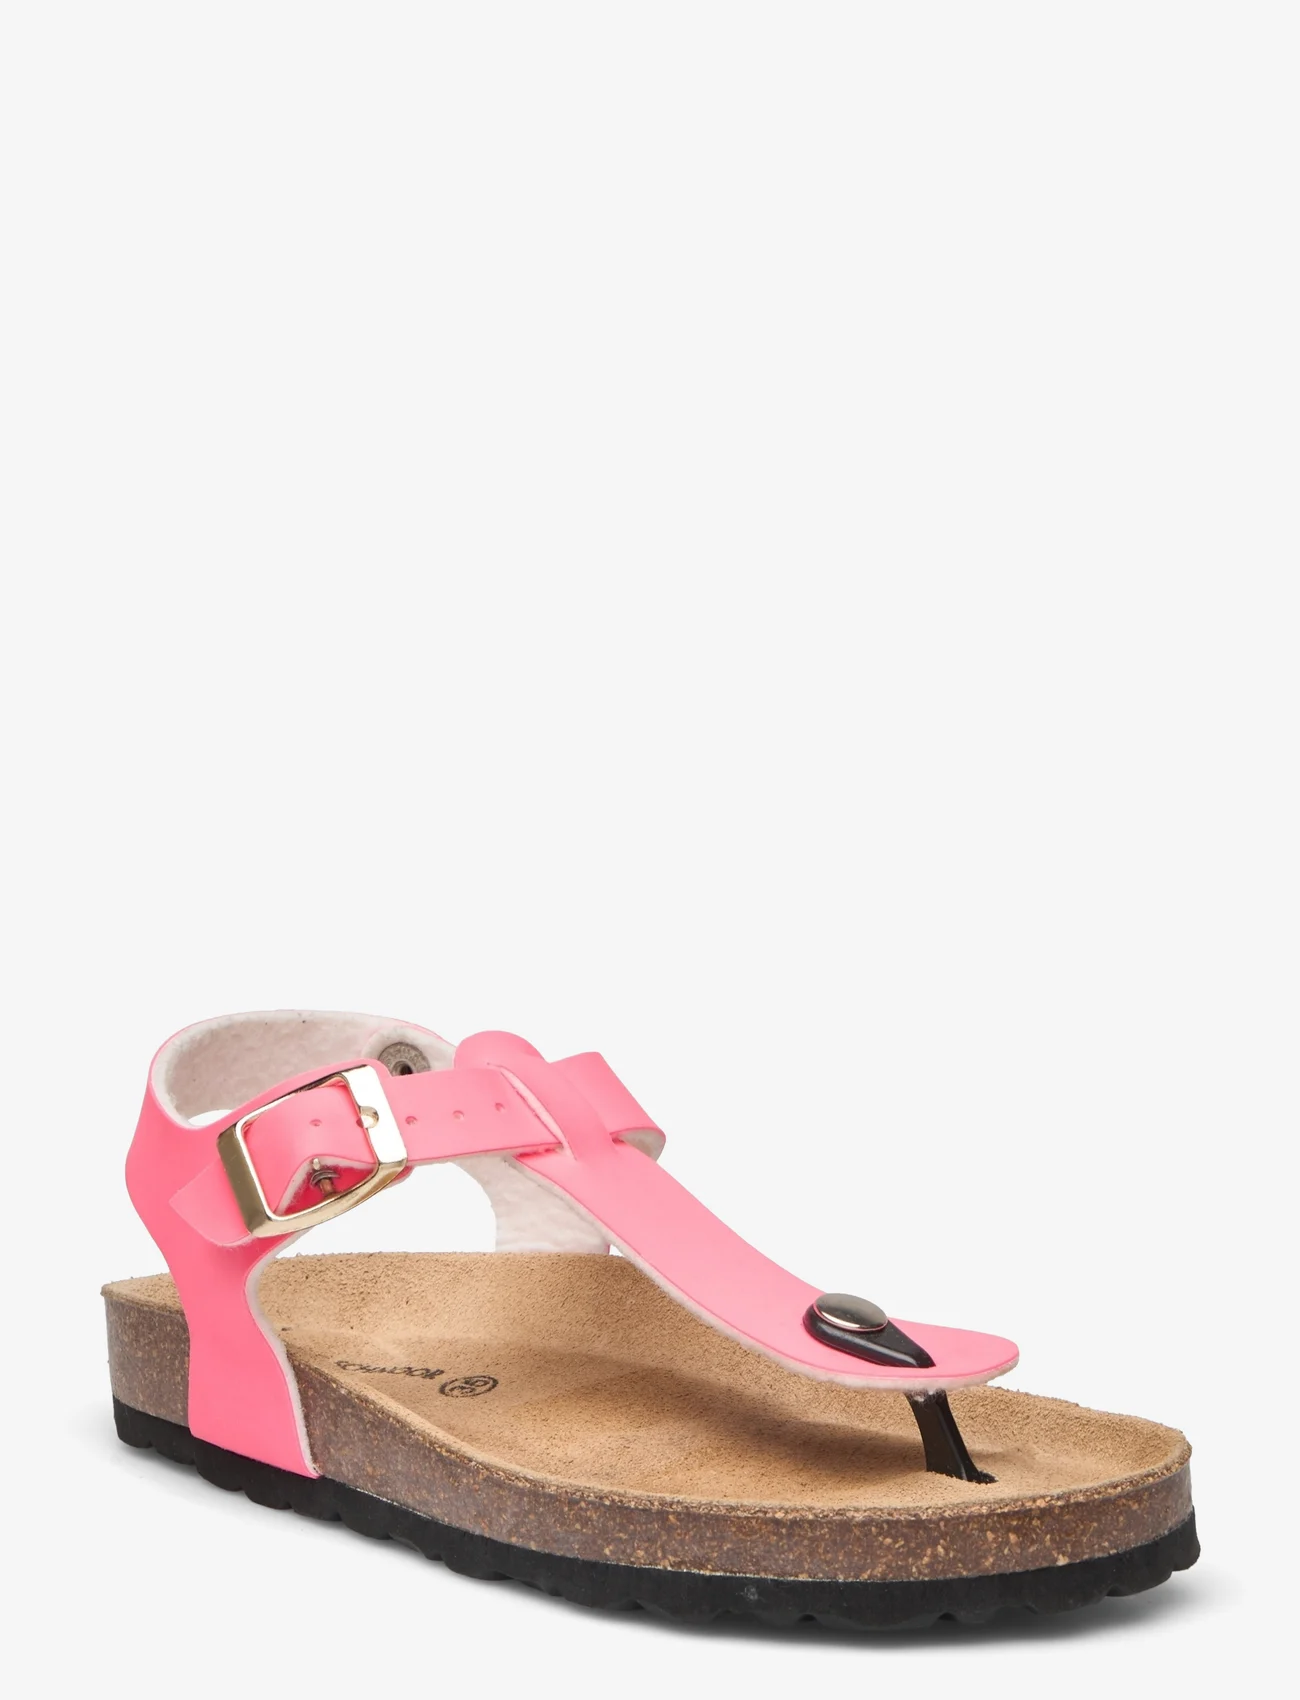 Sofie Schnoor Baby and Kids - Sandal lacquer - summer savings - coral pink - 0